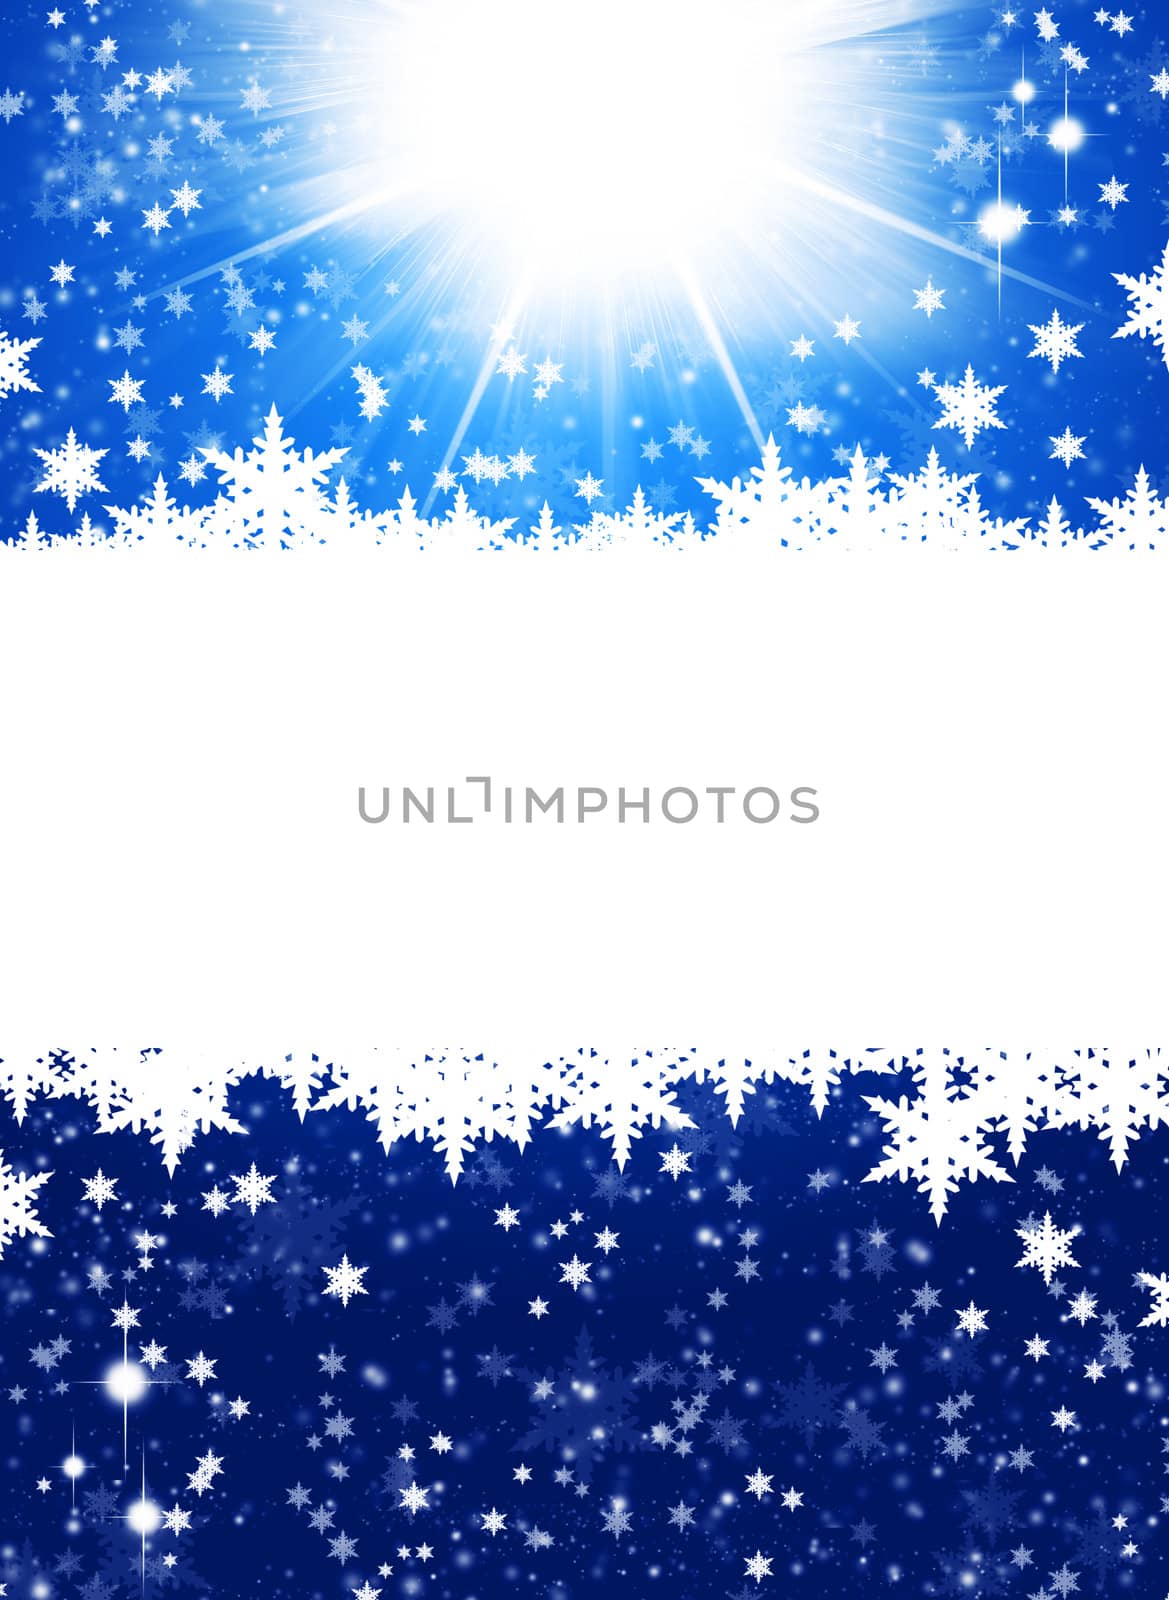 New Year's background. Snowflakes on abstract blue background